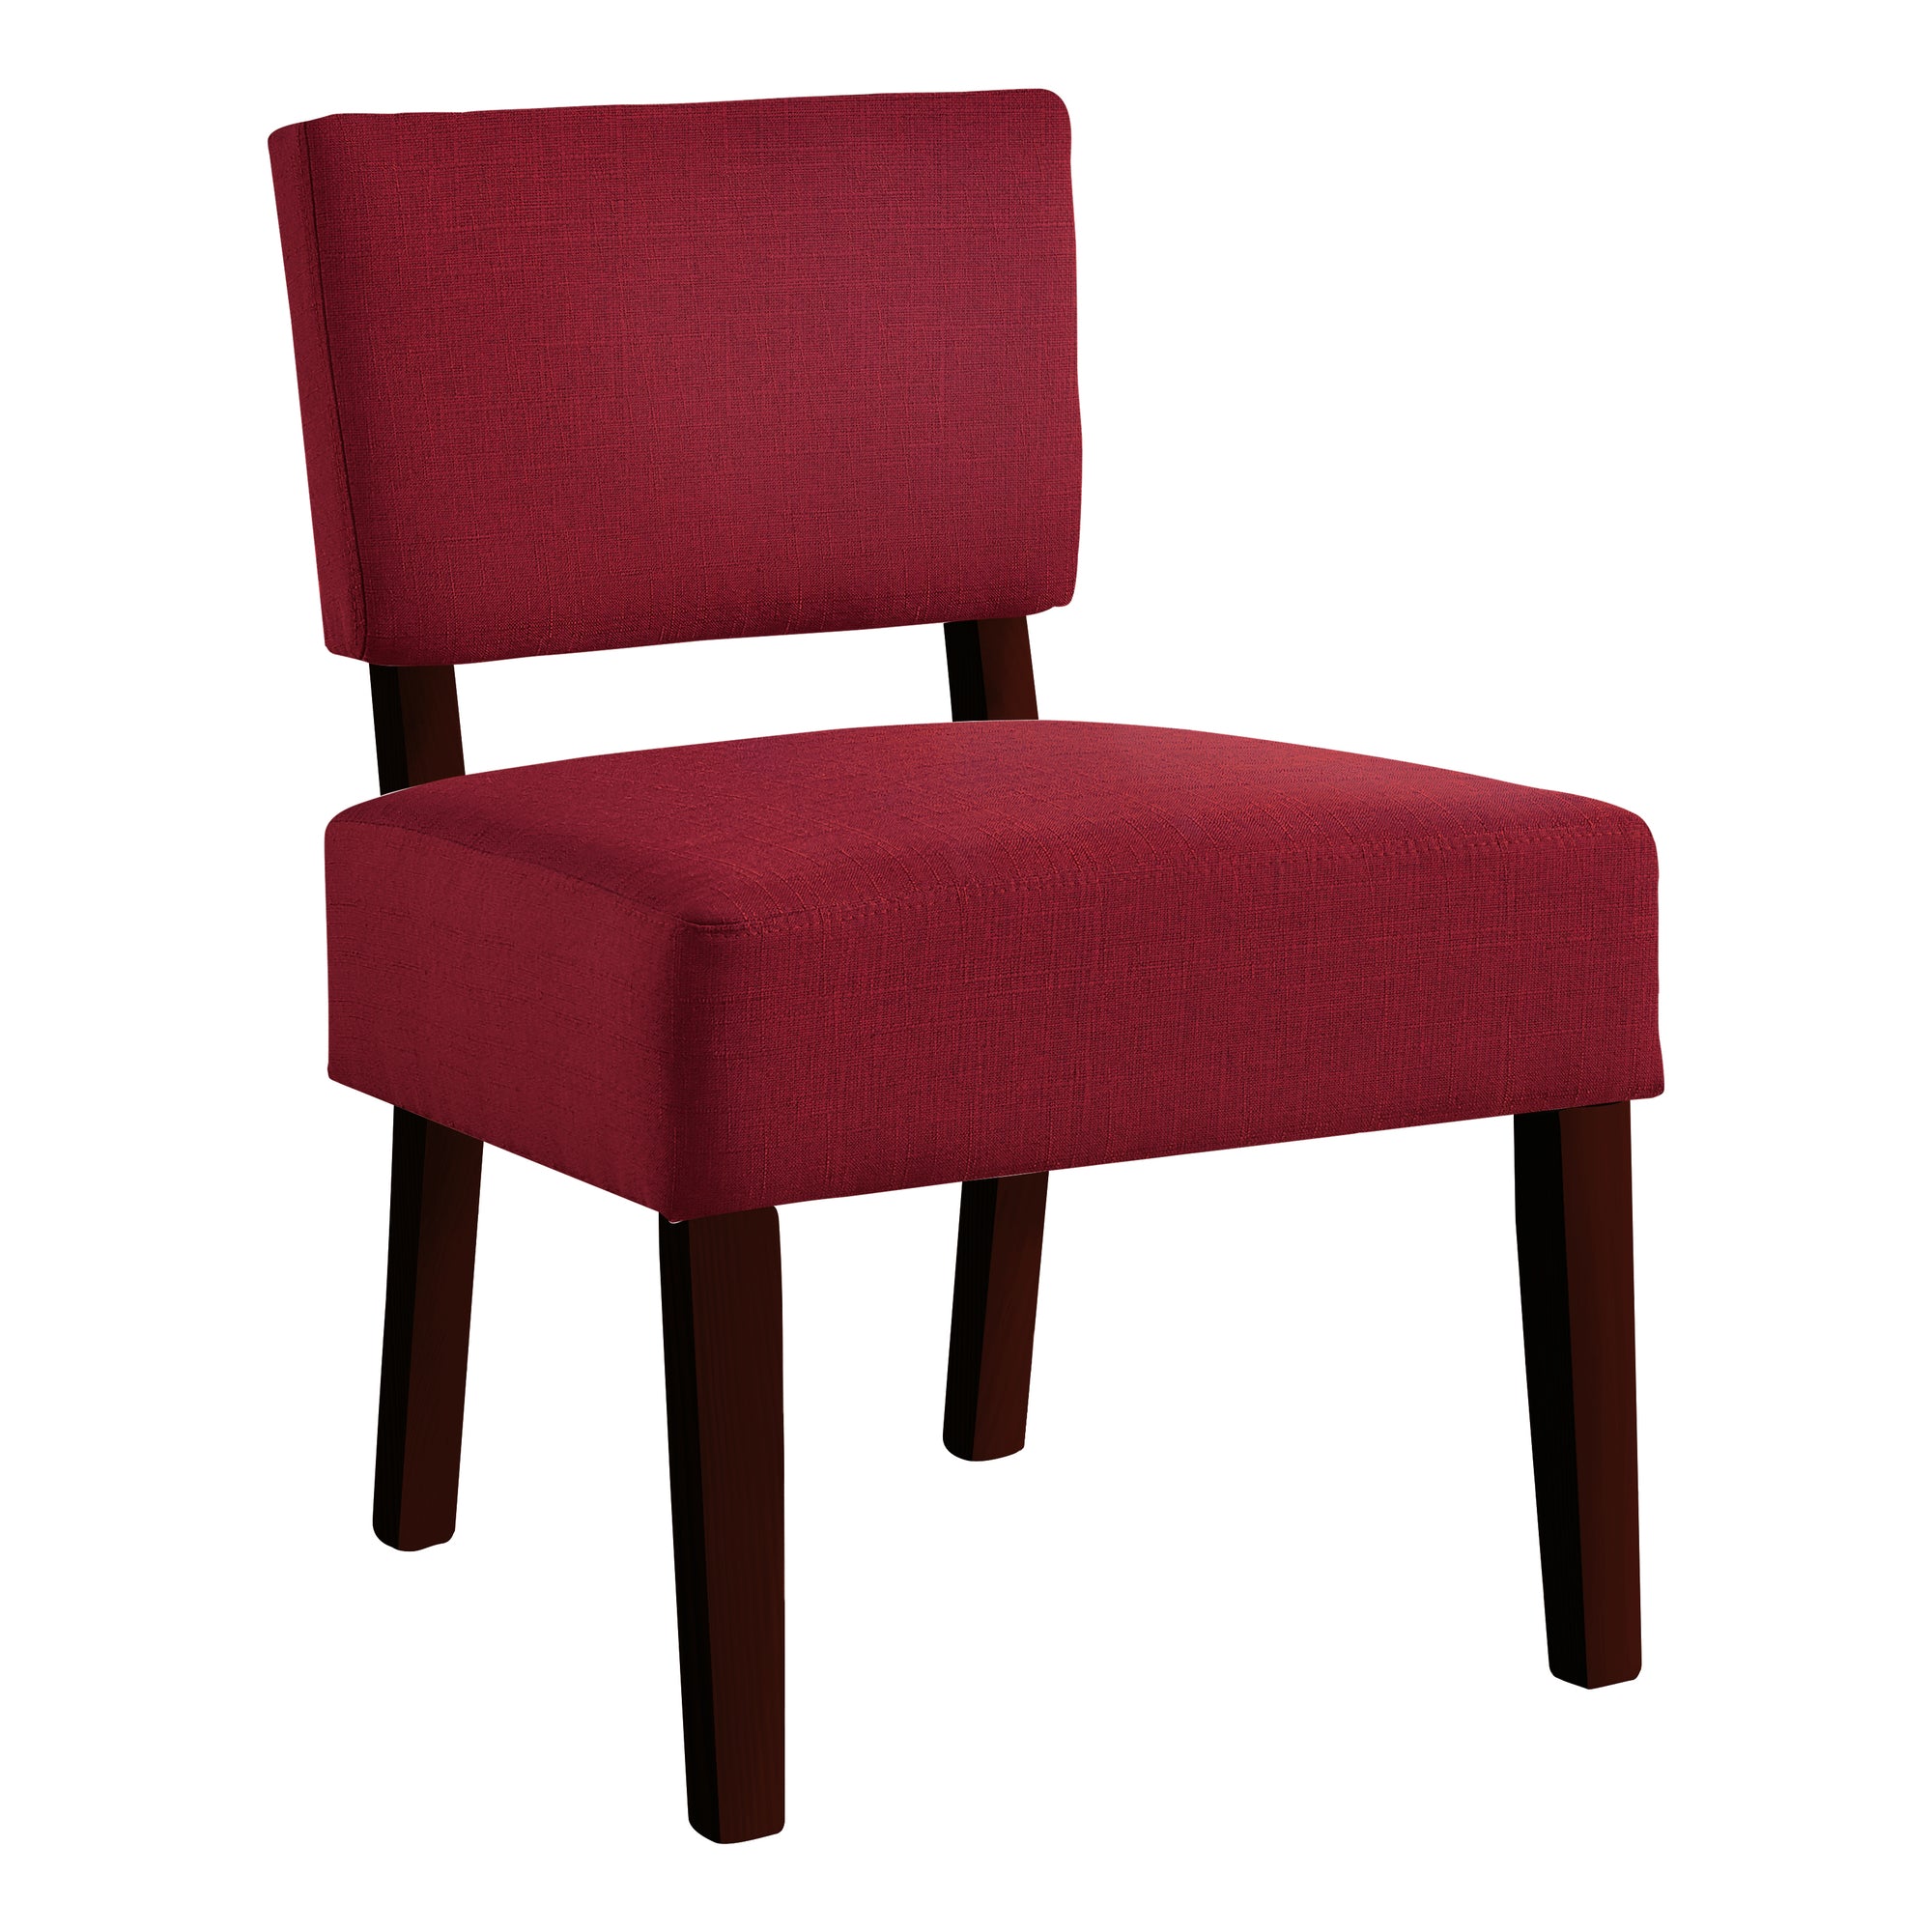 ACCENT CHAIR - RED FABRIC / NATURAL WOOD LEGS